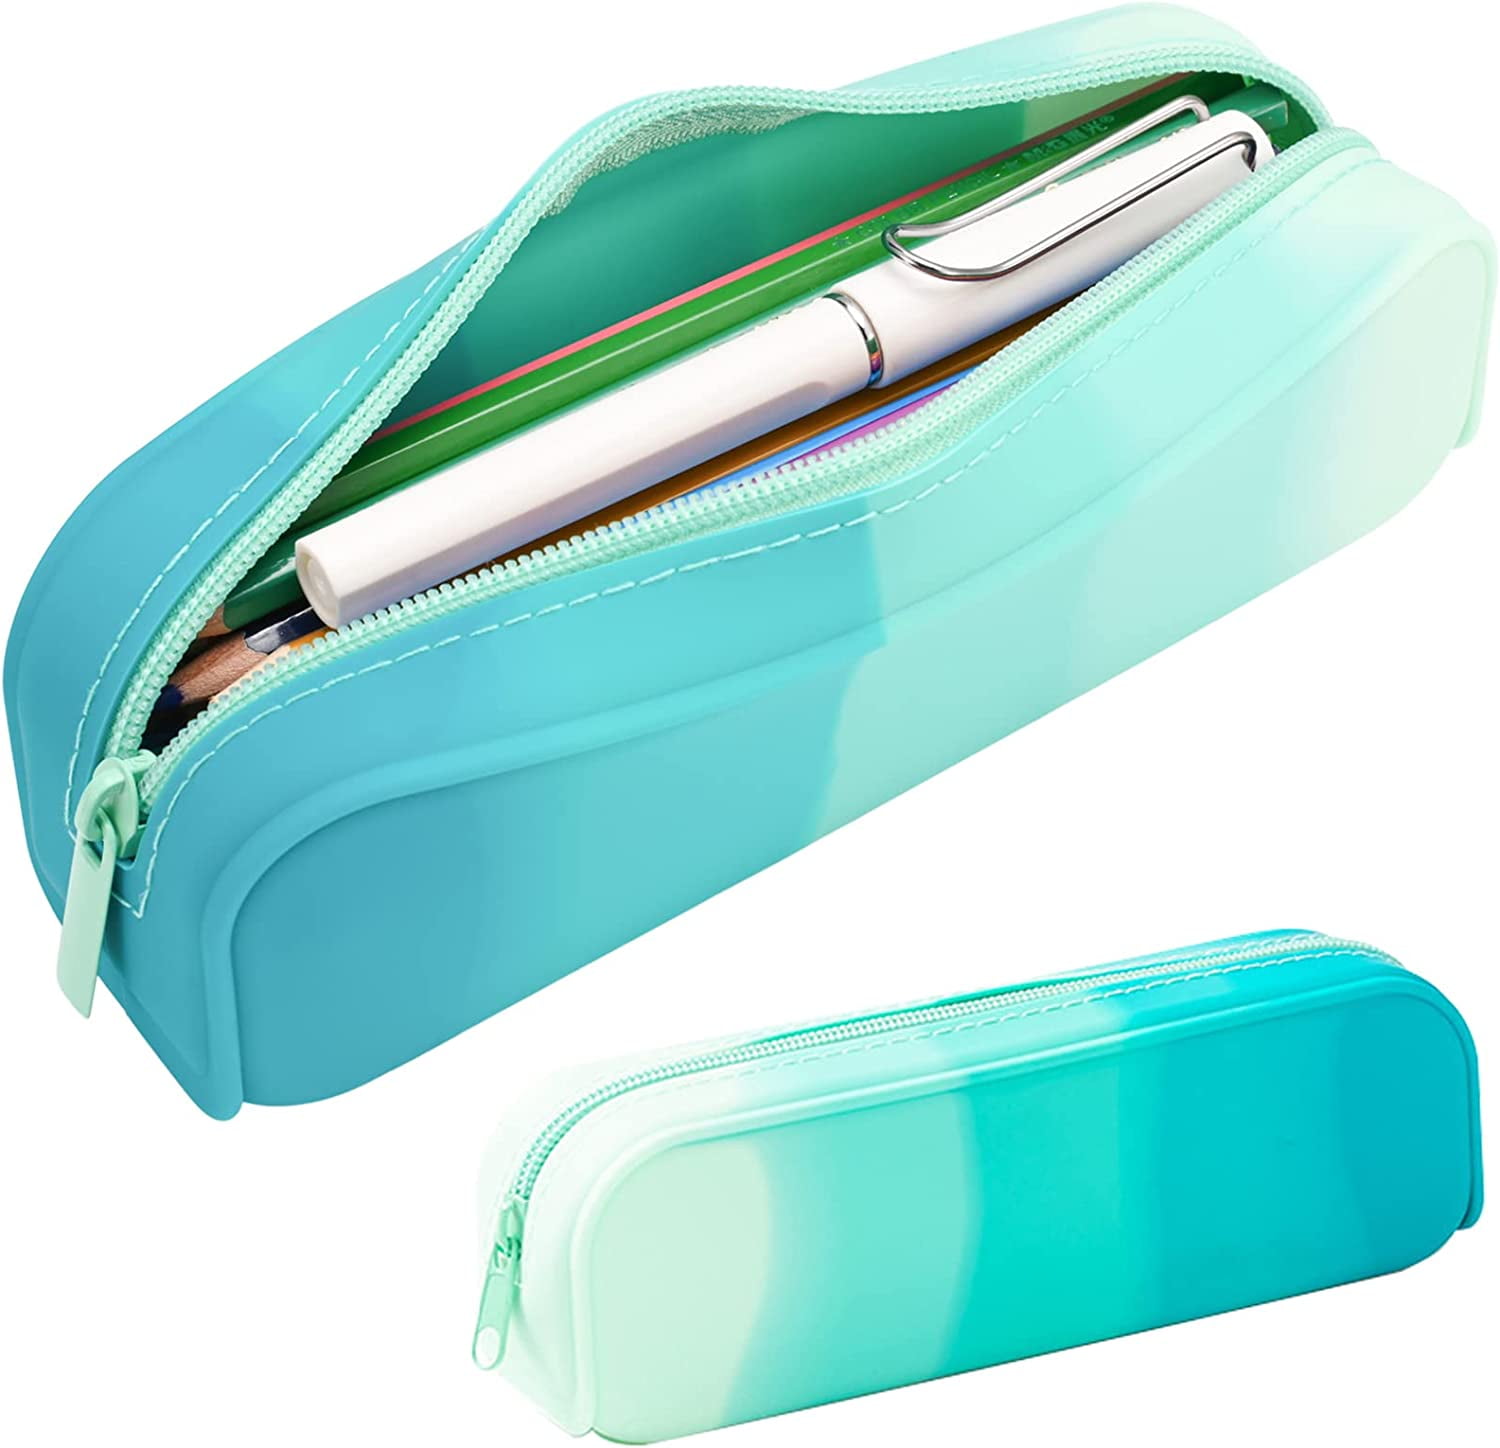 Pencil Case,Colorful Silicone Waterproof Pencil Pouch Aesthetic